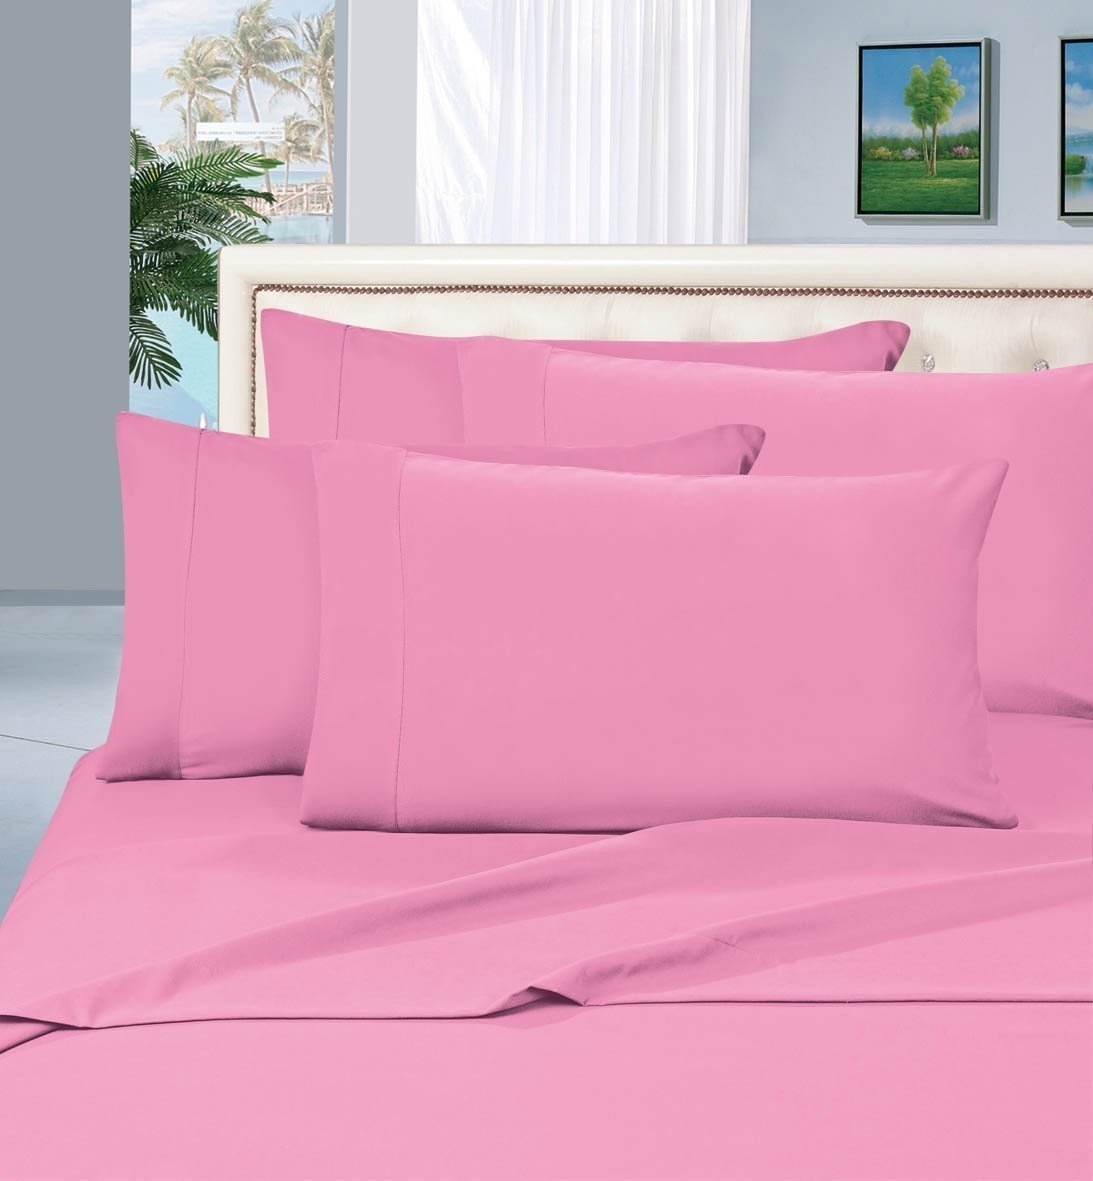 Elegant Comfort 1500 Series Wrinkle Resistant Egyptian Quality Hypoallergenic Ultra Soft Luxury 4-piece Bed Sheet Set, Full, Light Pink